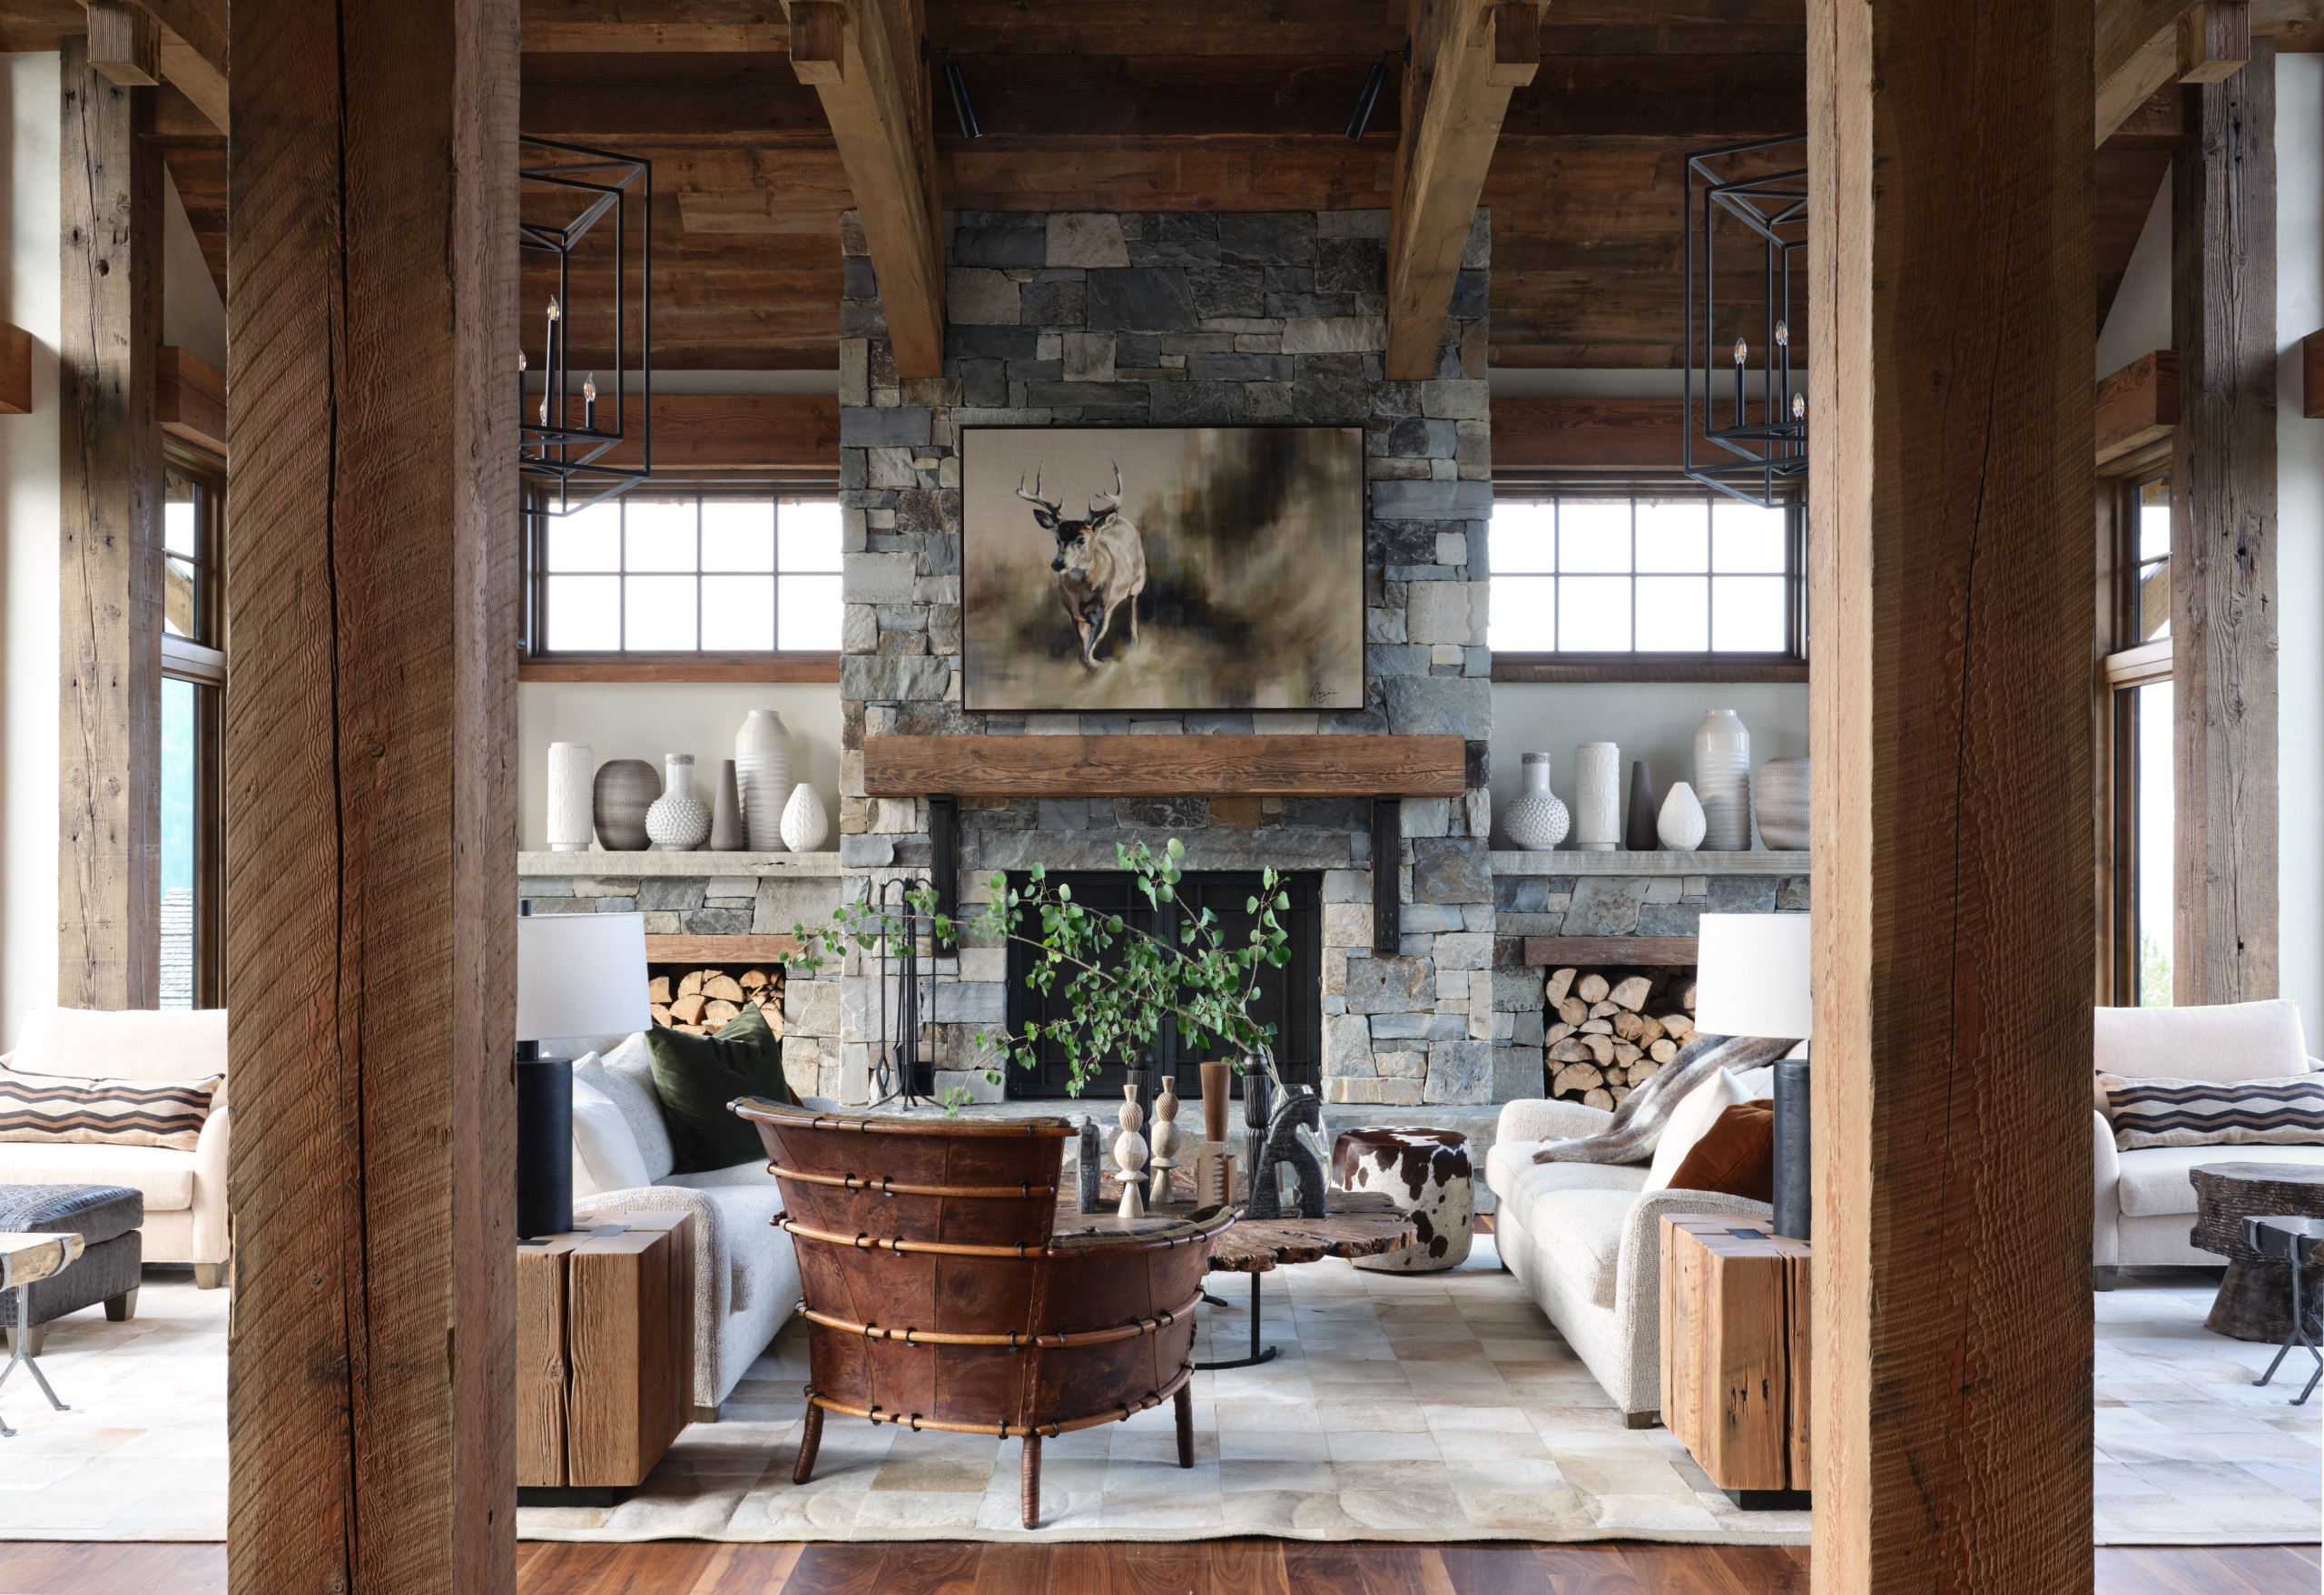 69 Yellowstone inspired homes ideas  house interior, house design, rustic  house